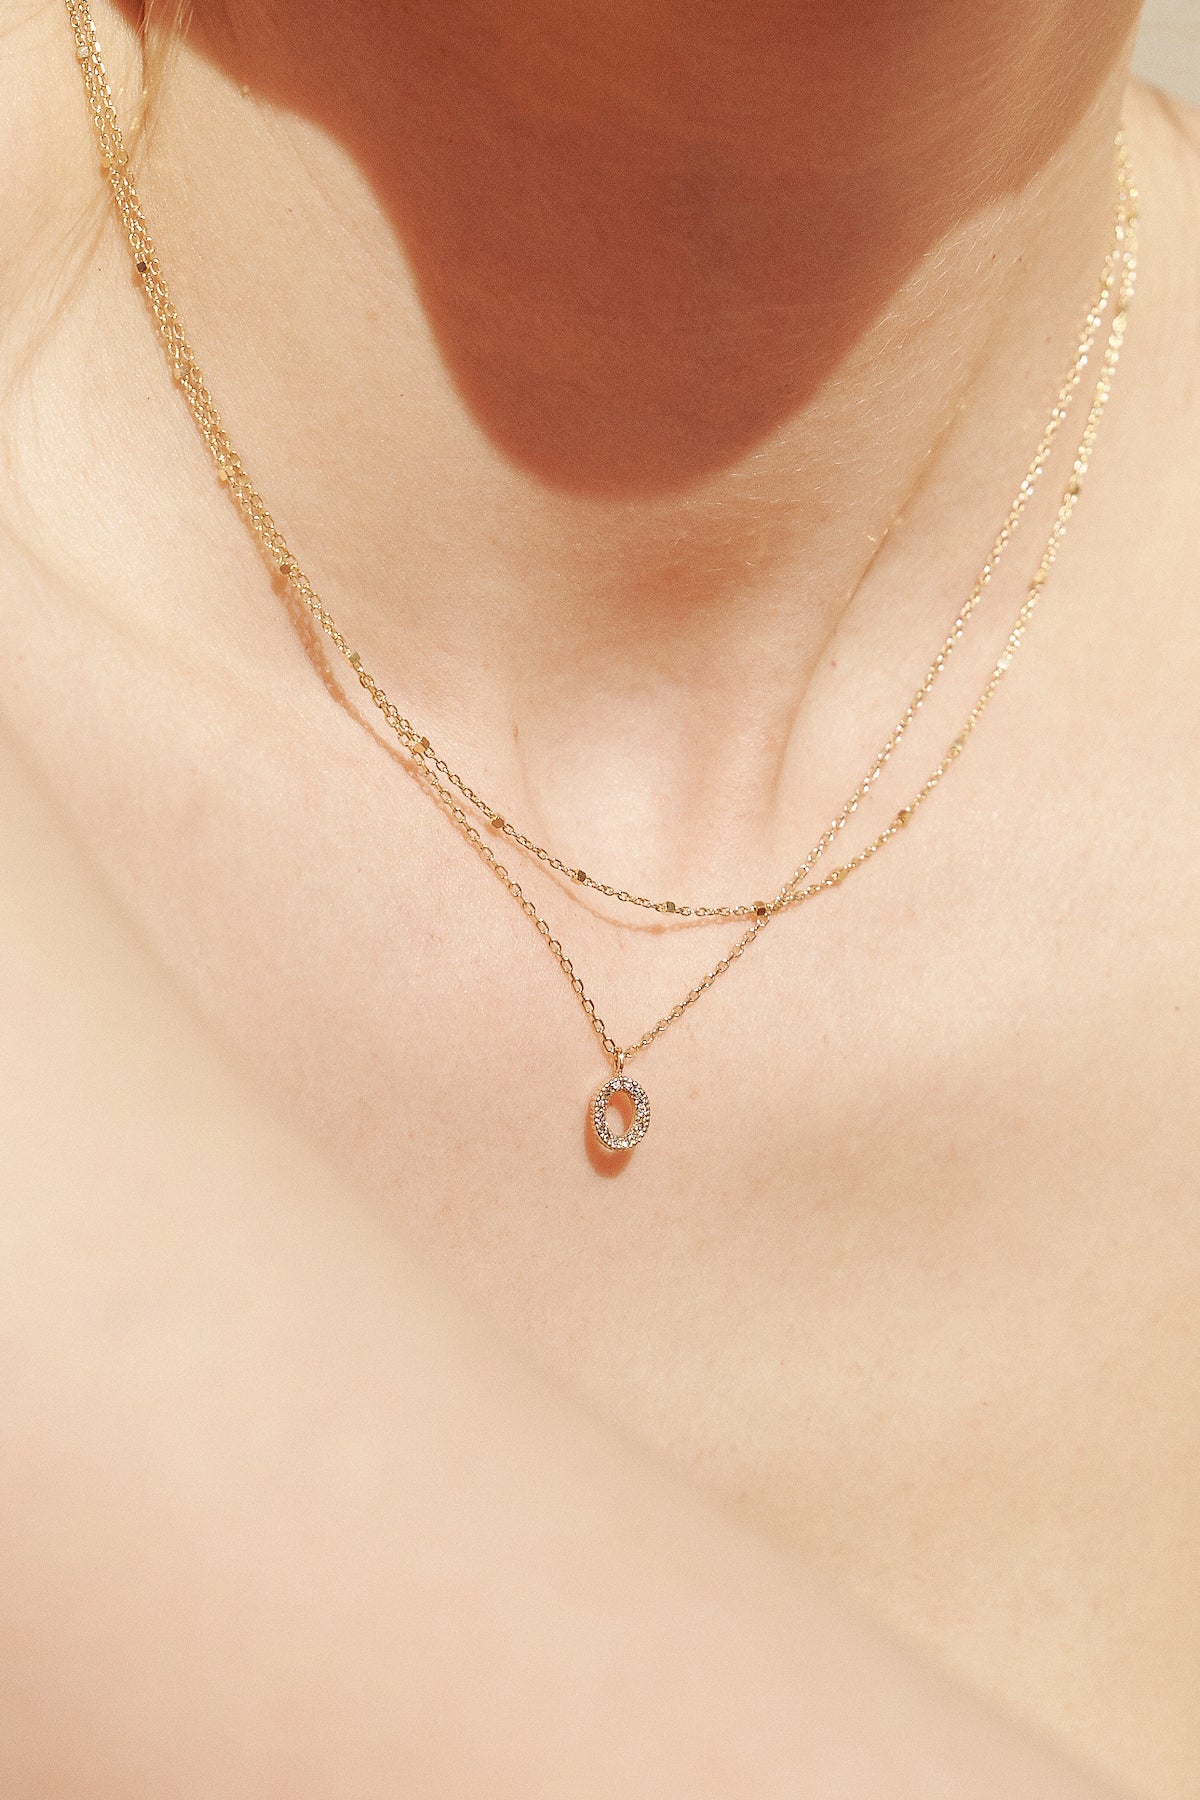 Square Soft Layered Necklace